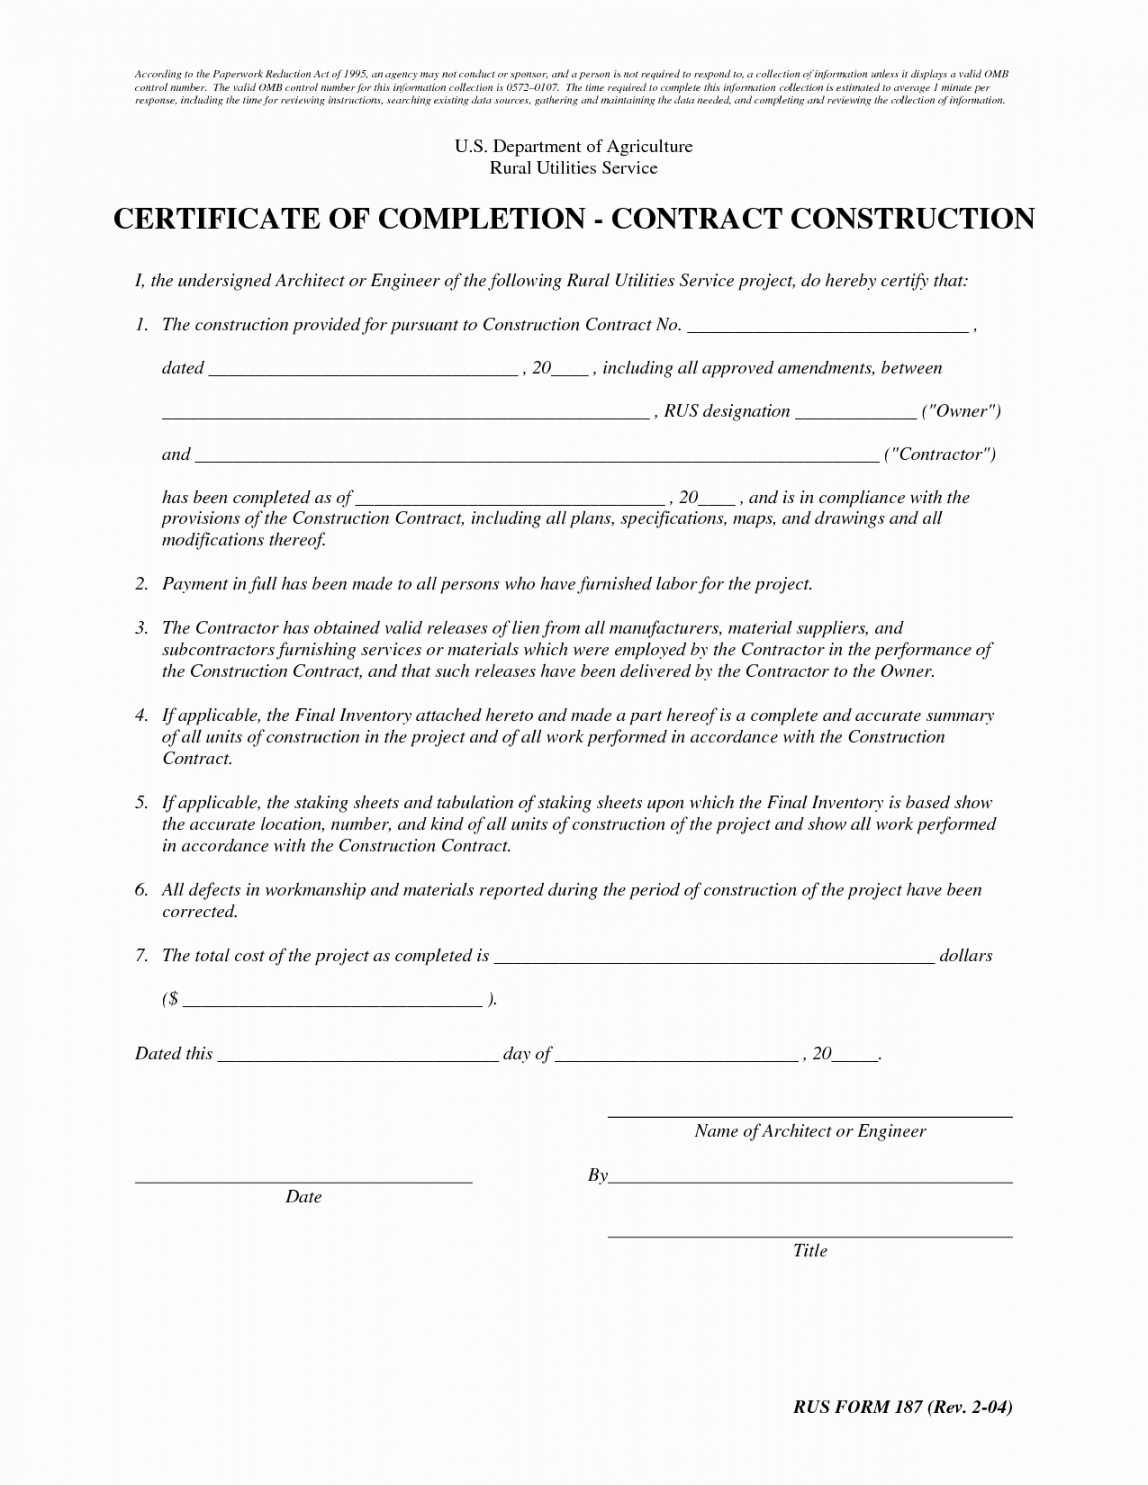 Free Certificate Of Completion Template Construction Design With Regard To Construction Certificate Of Completion Template